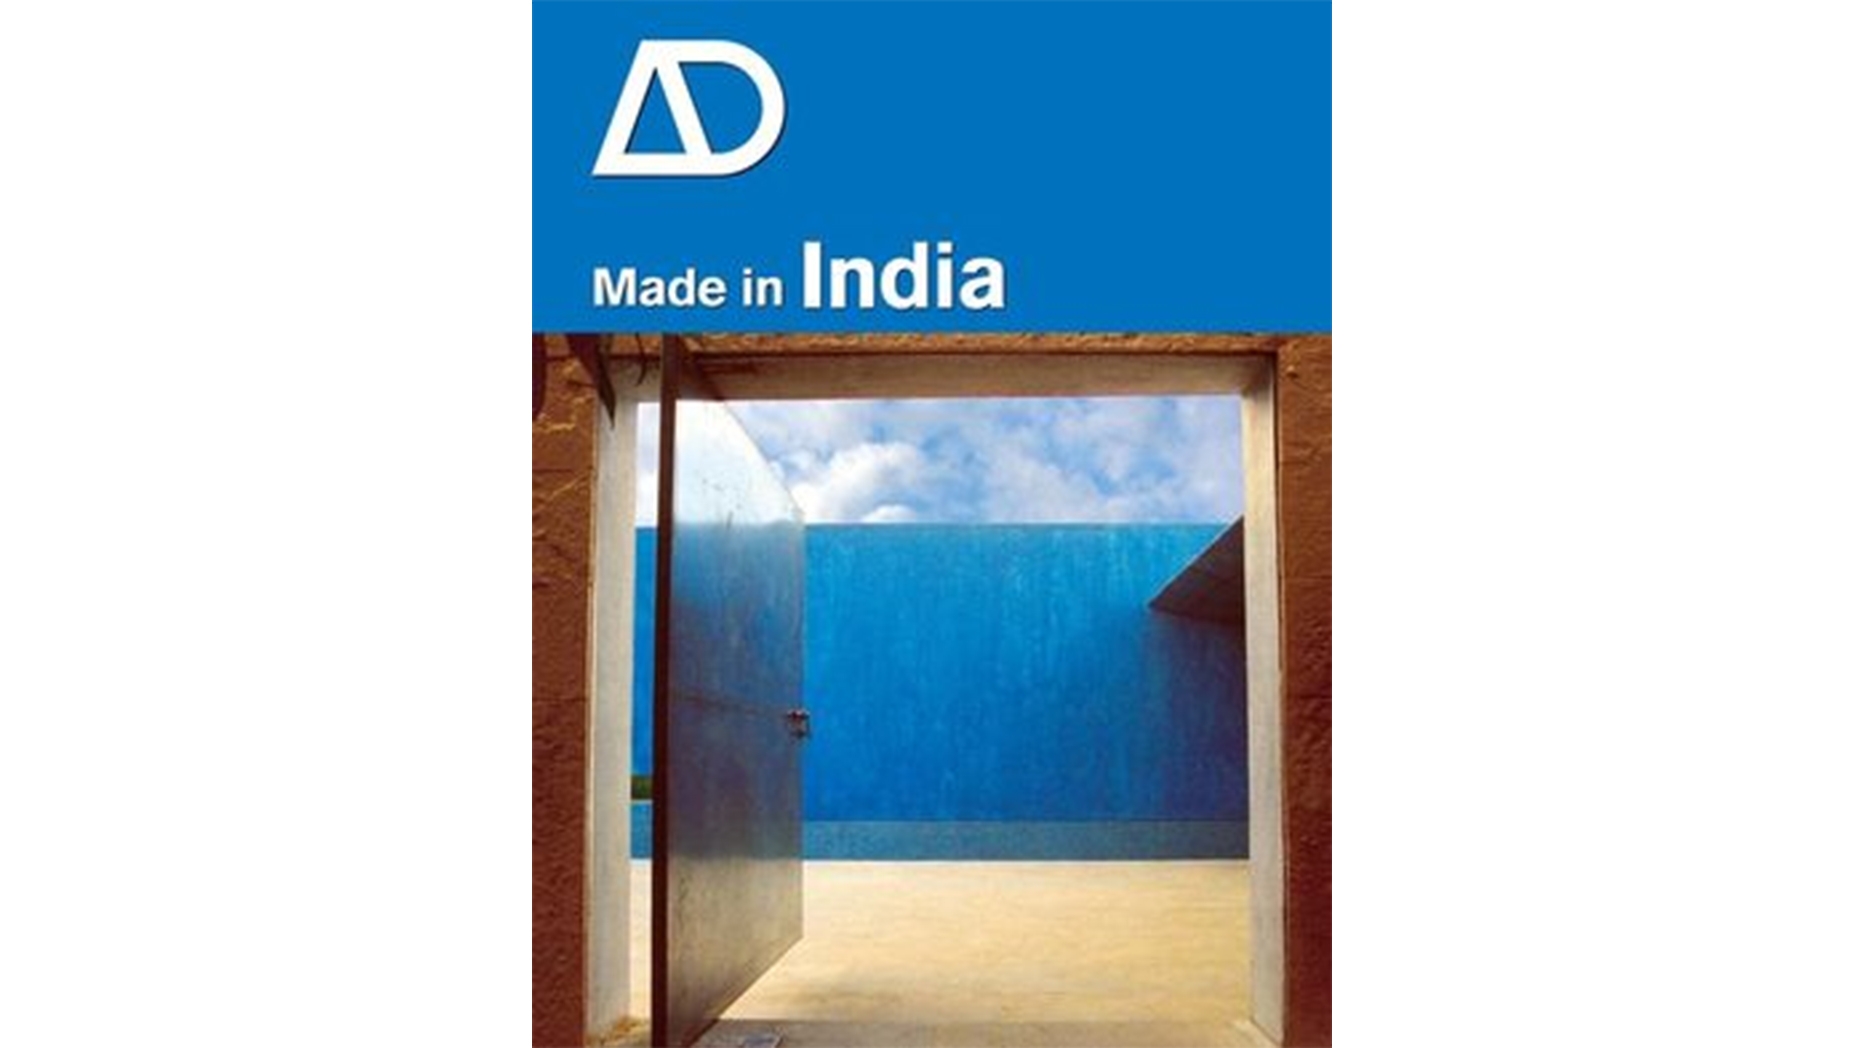 Book Cover of The Architectural Design Special Volume "Made in India"